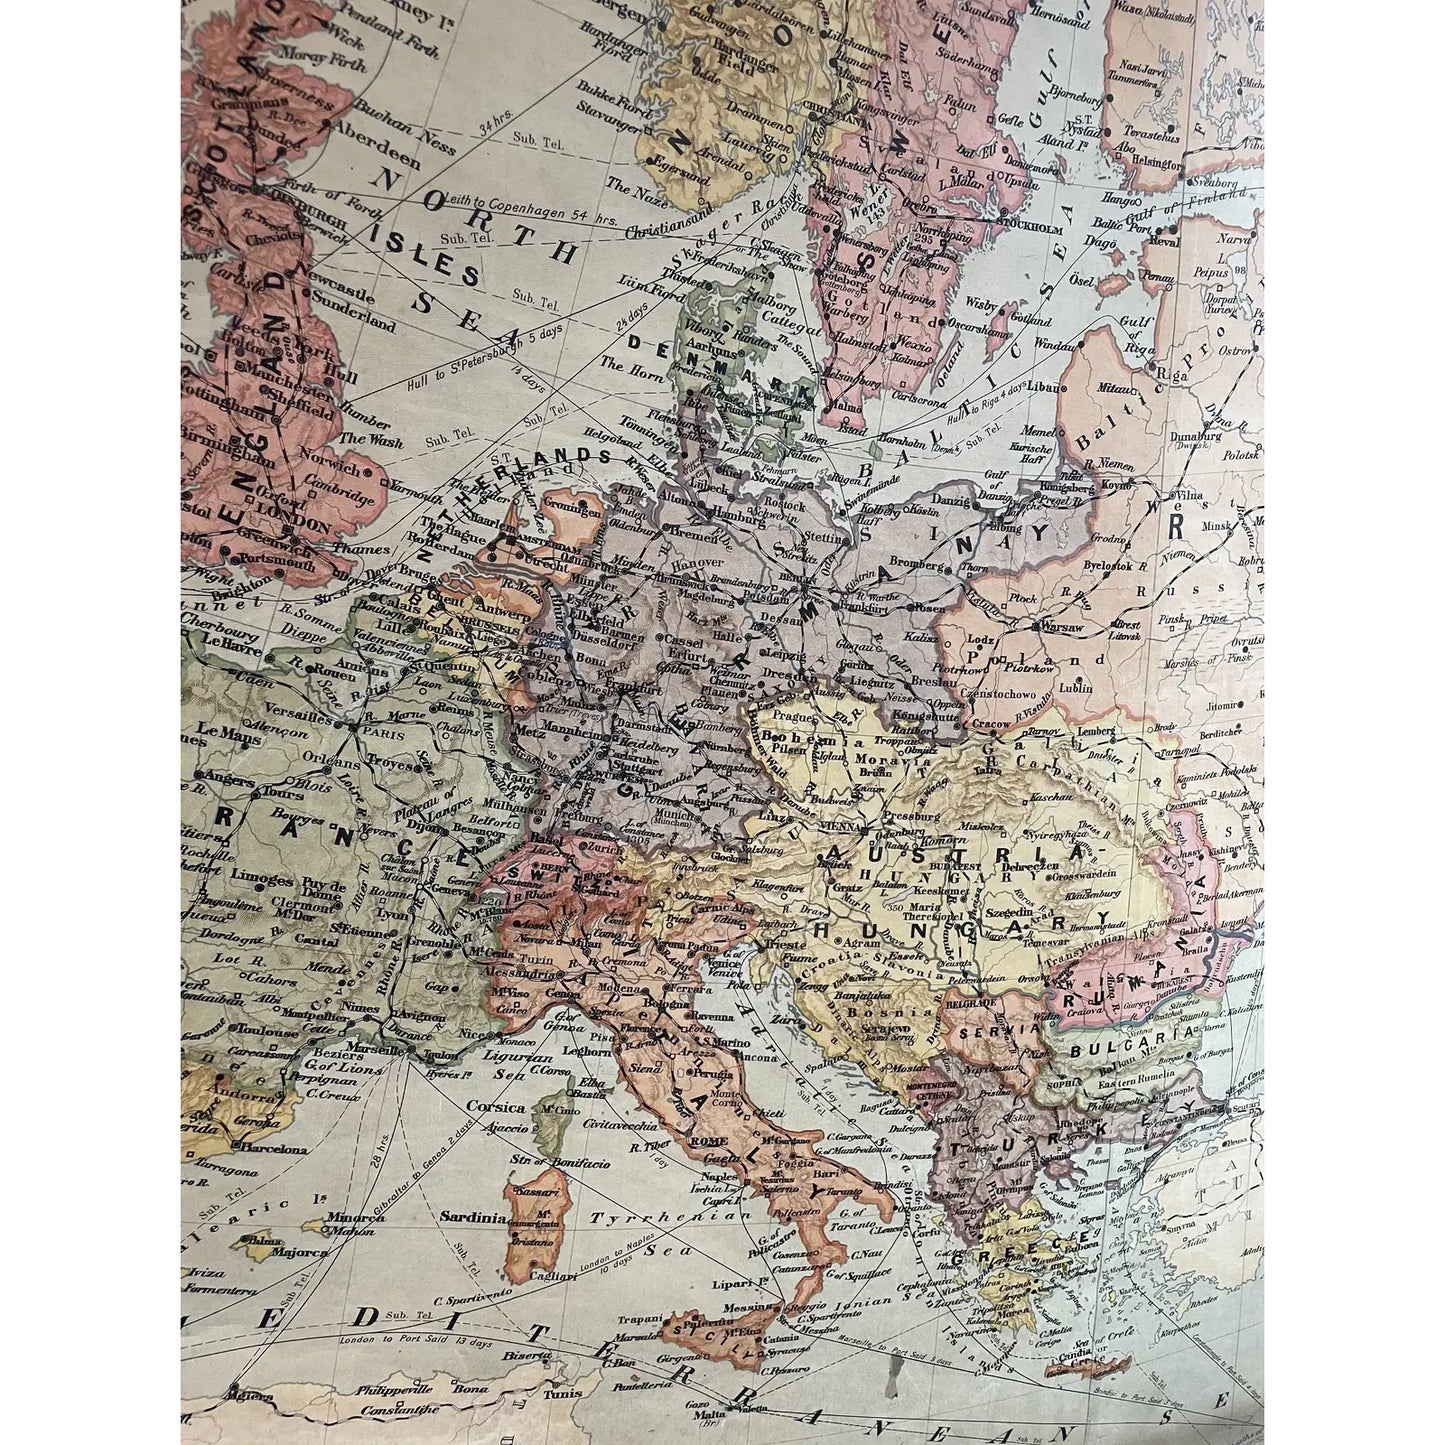 Antique Map of Europe Constructed & Engraved by W. & a.k. Johnston, Limited 1898